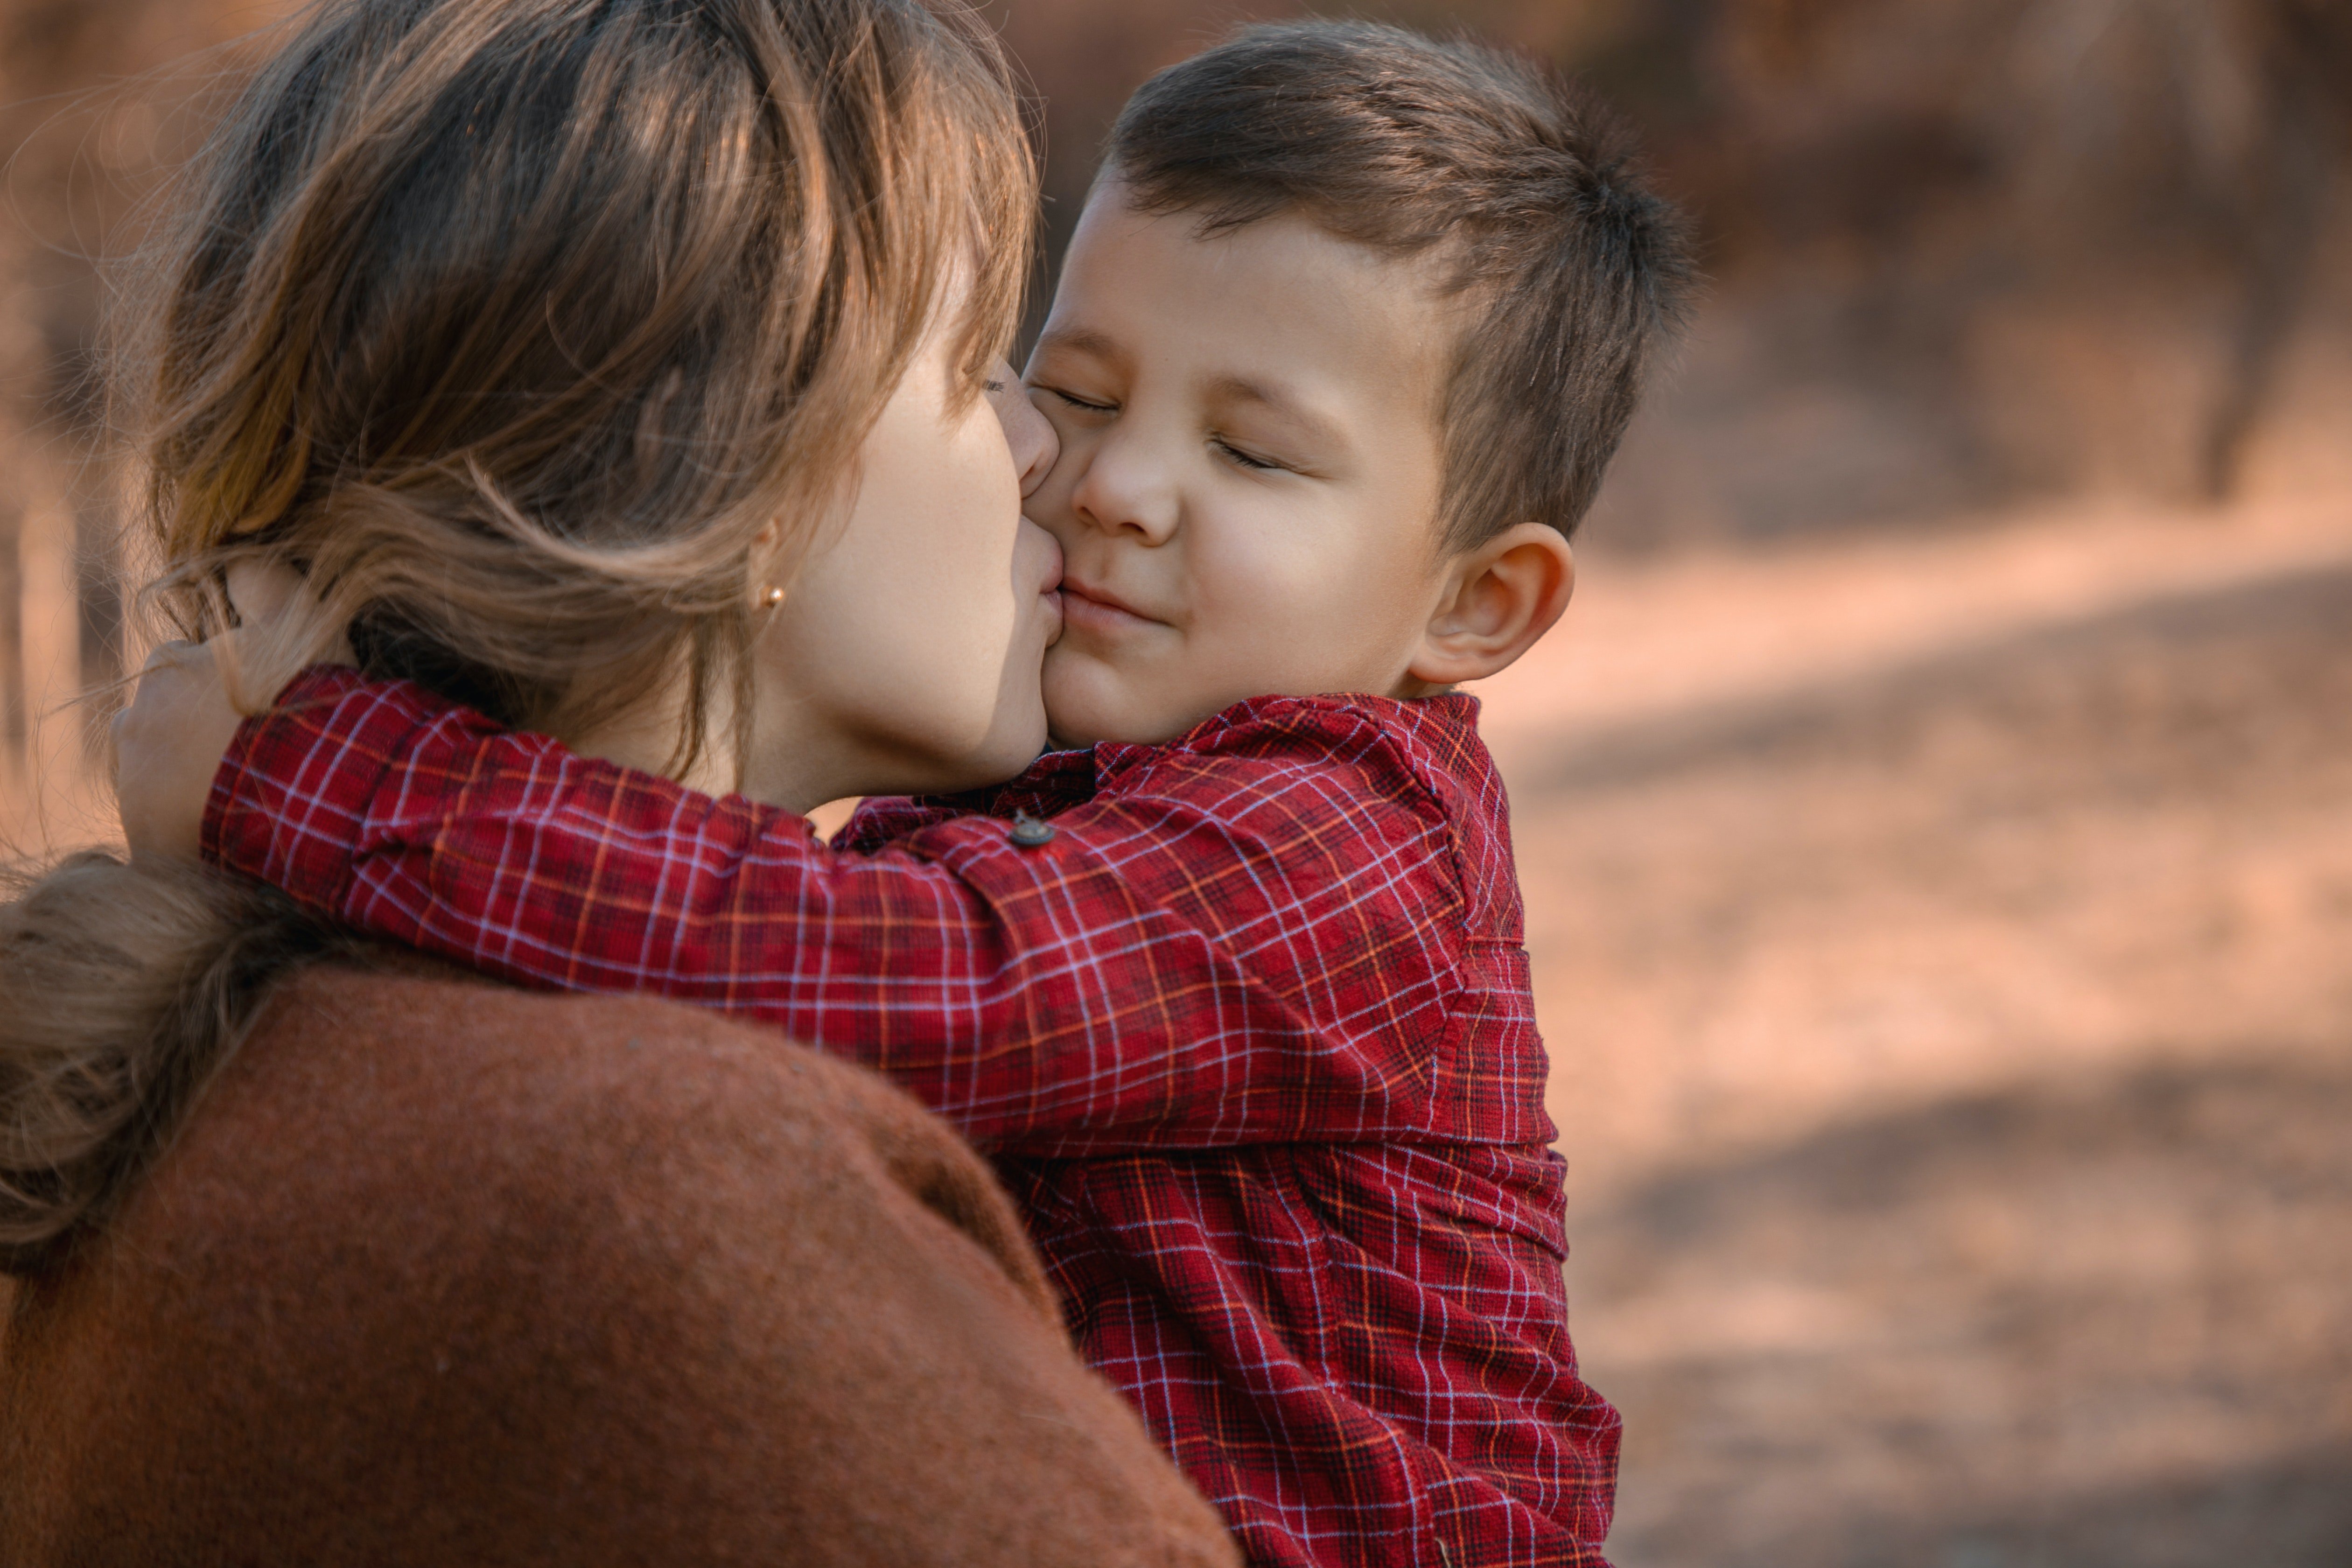 He was about to give up searching for the boy and his mother when he found them one weekend at the park  | Source: Pexels